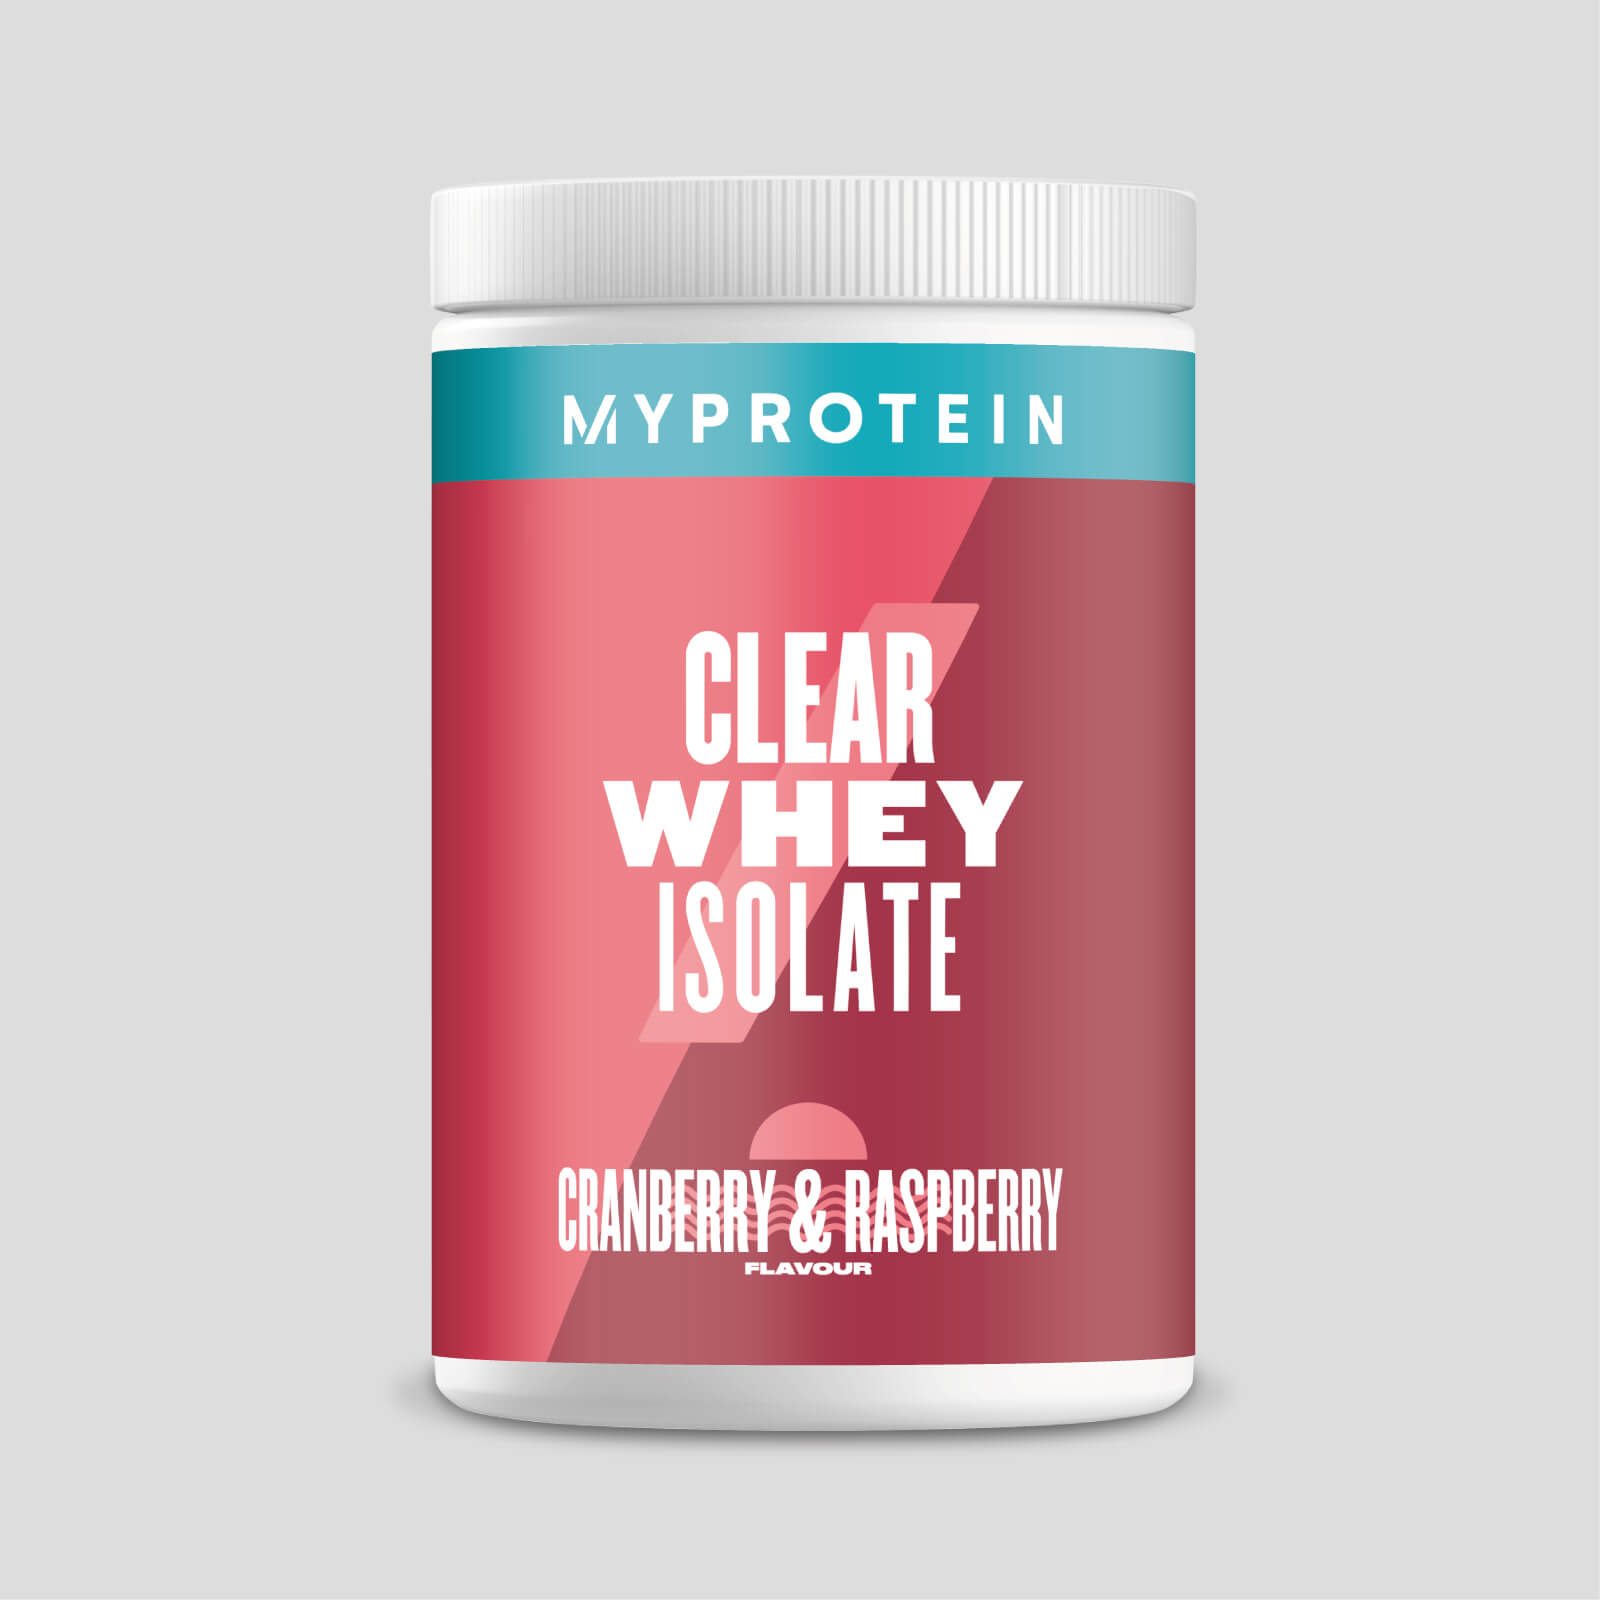 Myprotein Clear Whey Isolate - 20servings - Cranberry & Raspberry